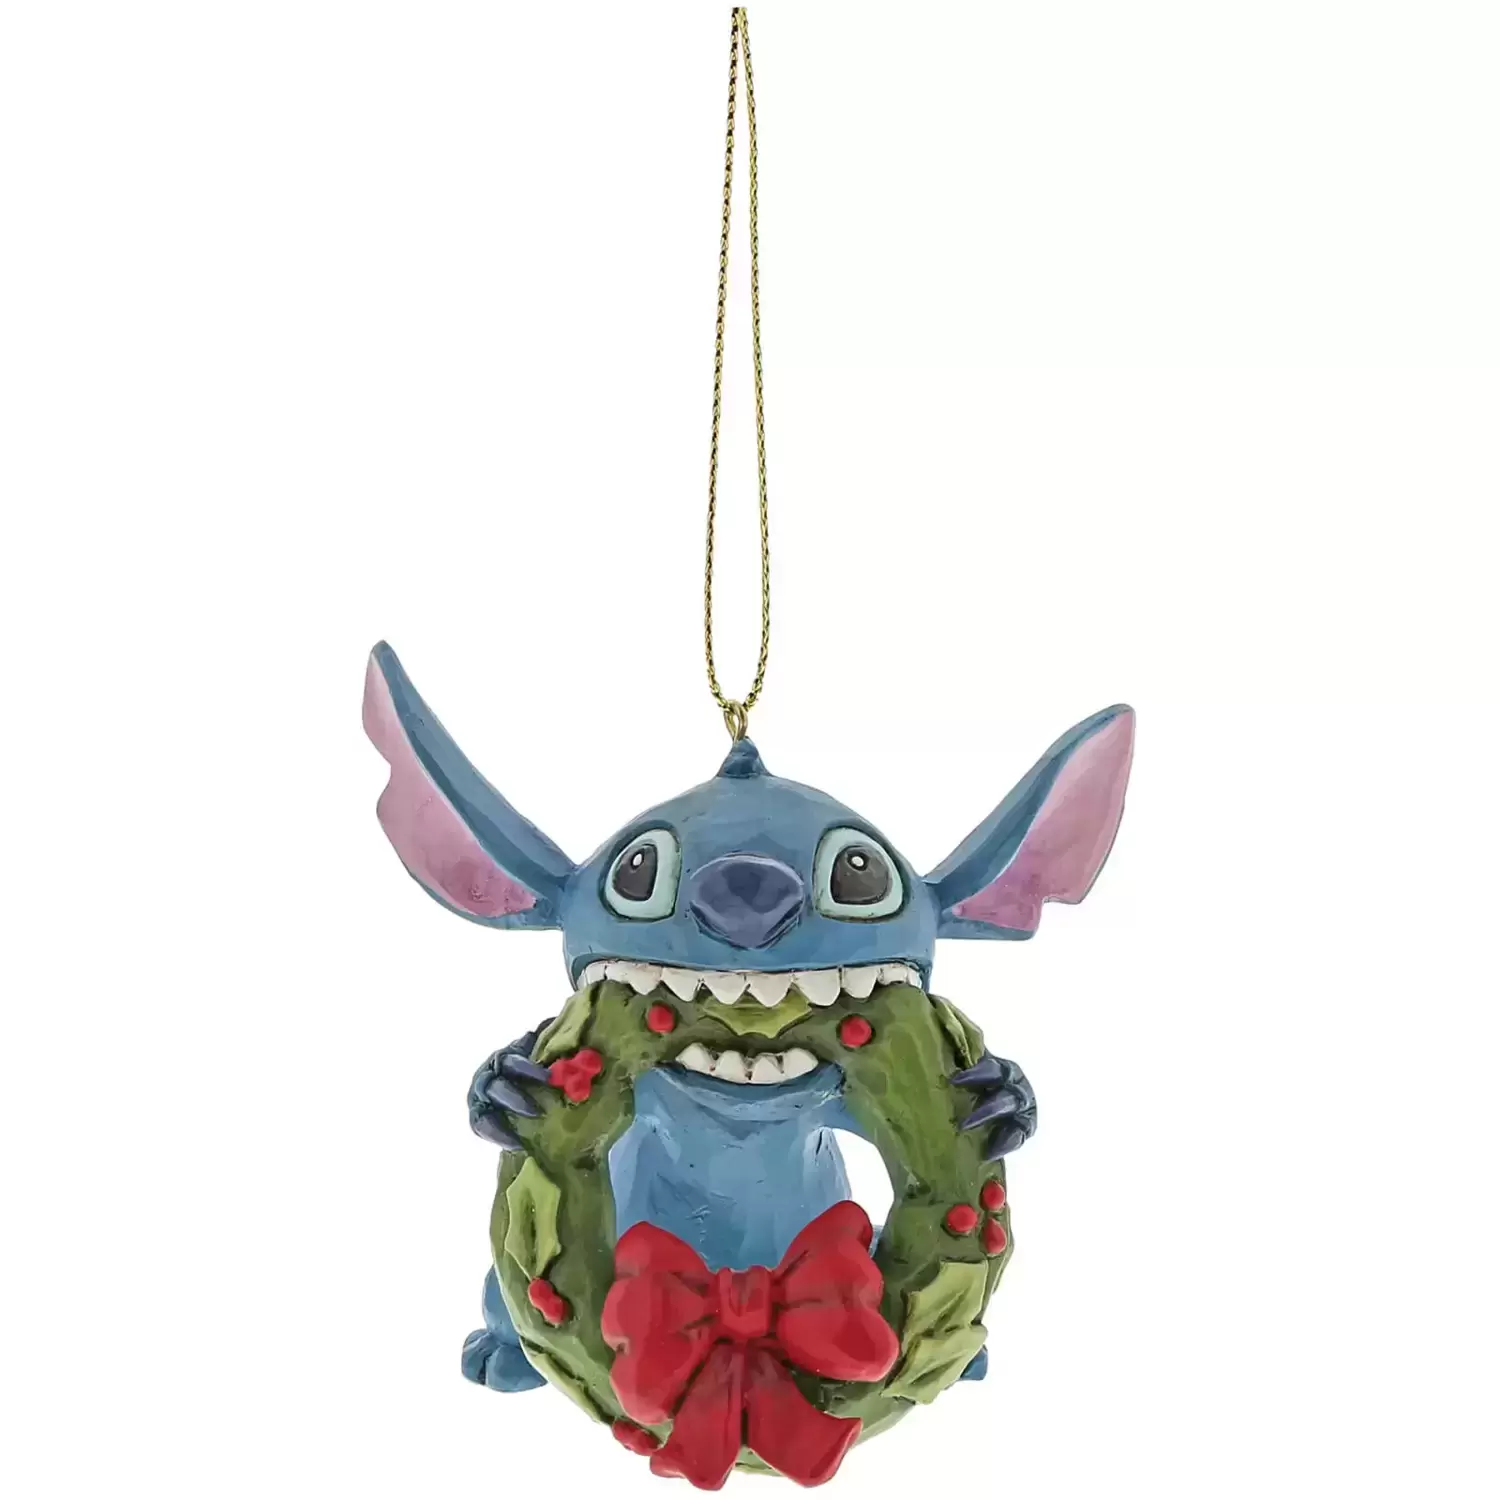 Disney Traditions by Jim Shore - Stitch Hanging Ornament